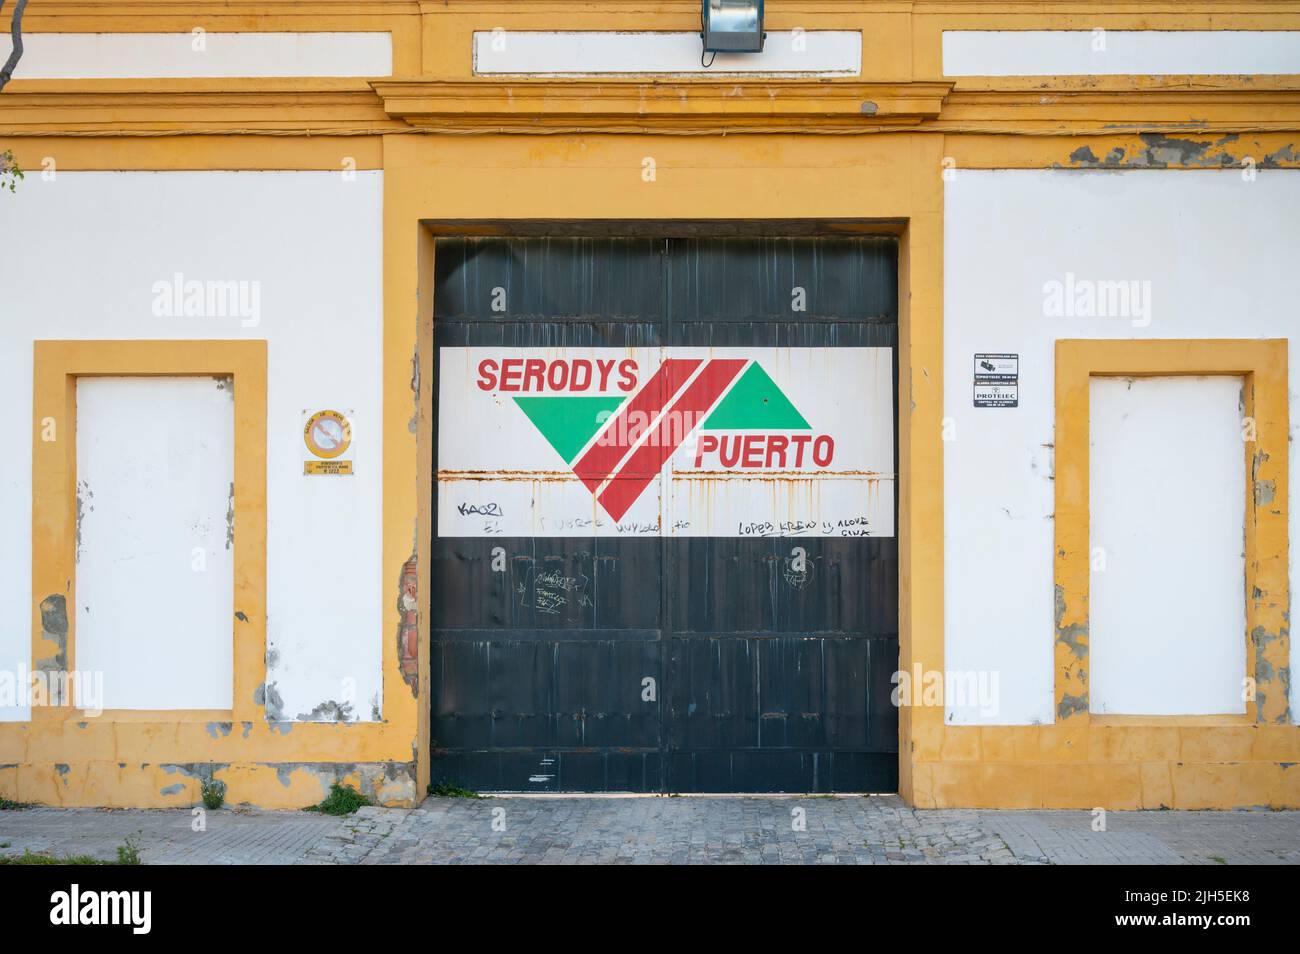 A serodys Puerto cash and carry sign on a door on an old sherry warehouse in Puerto Santa Maria Spain on a yellow and white building Stock Photo